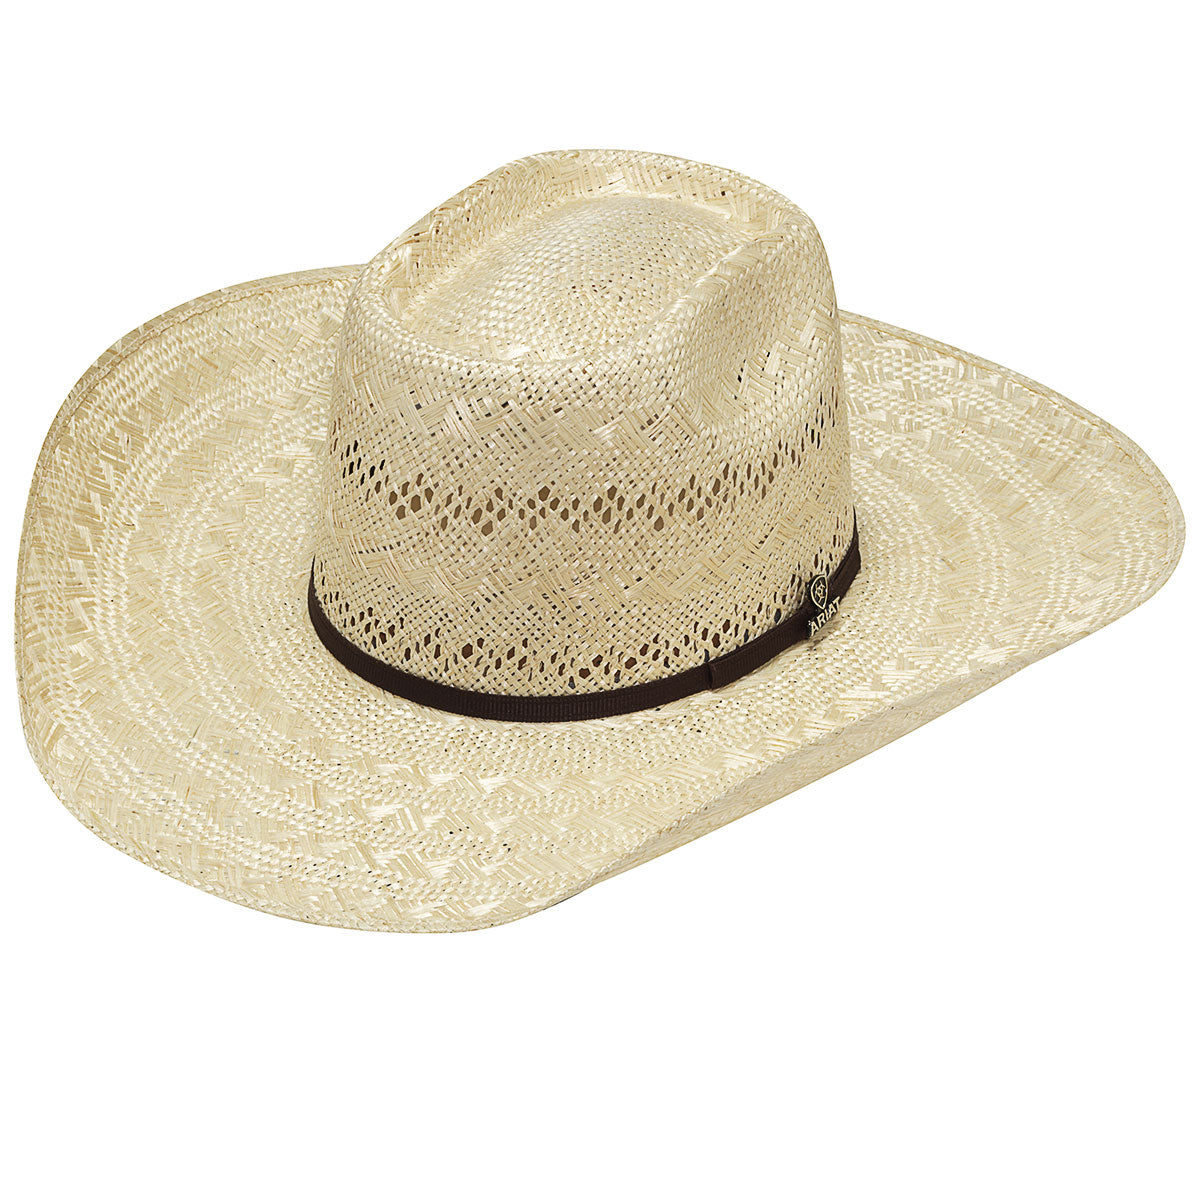 Ariat Sisal Western Hat - Natural Colour